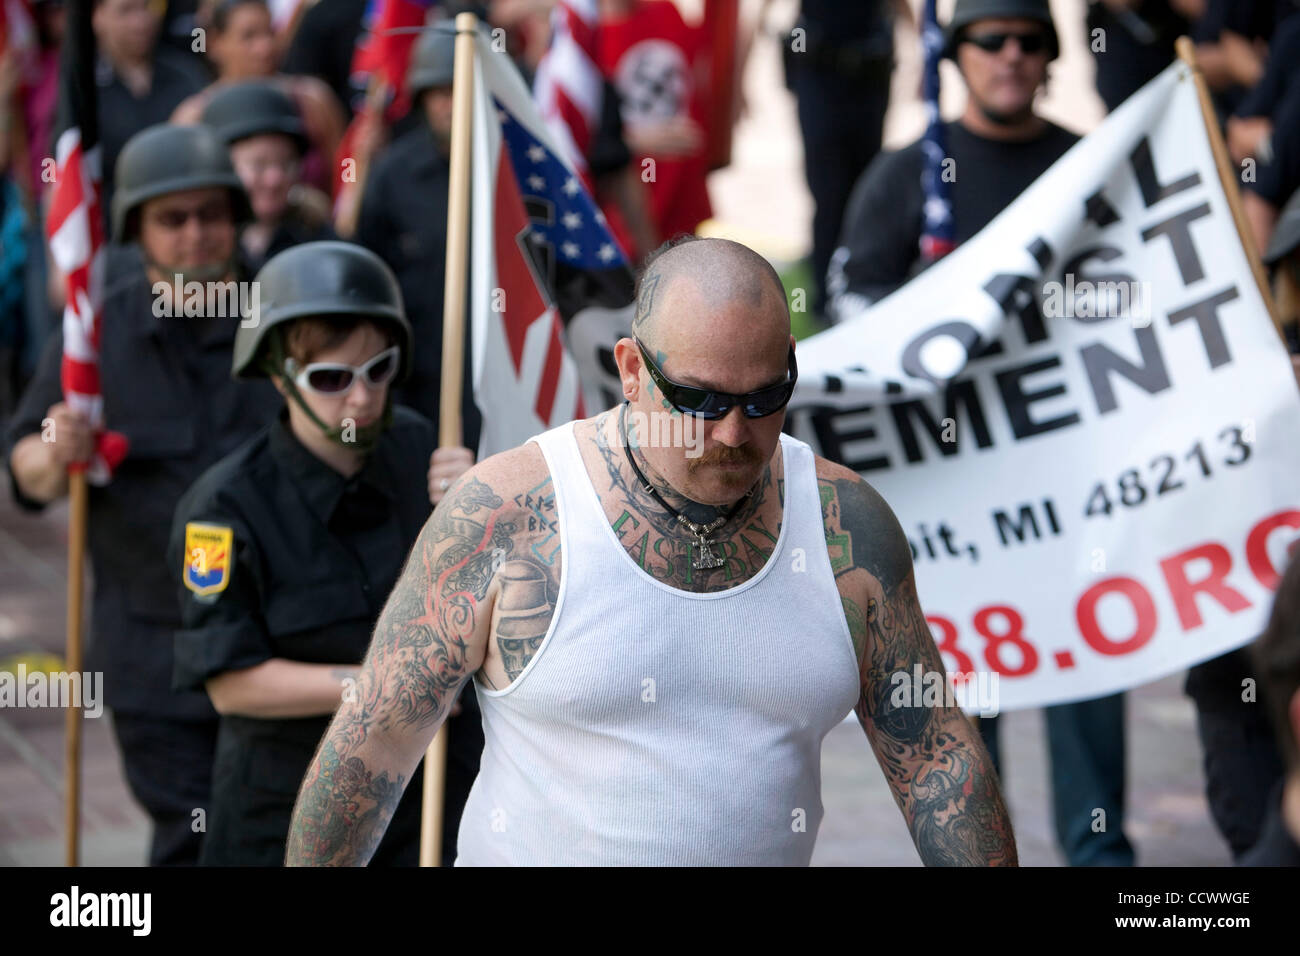 Behind heavy police protection, members of a neo nazi group spoke out against non-whites and homosexuals. Stock Photo